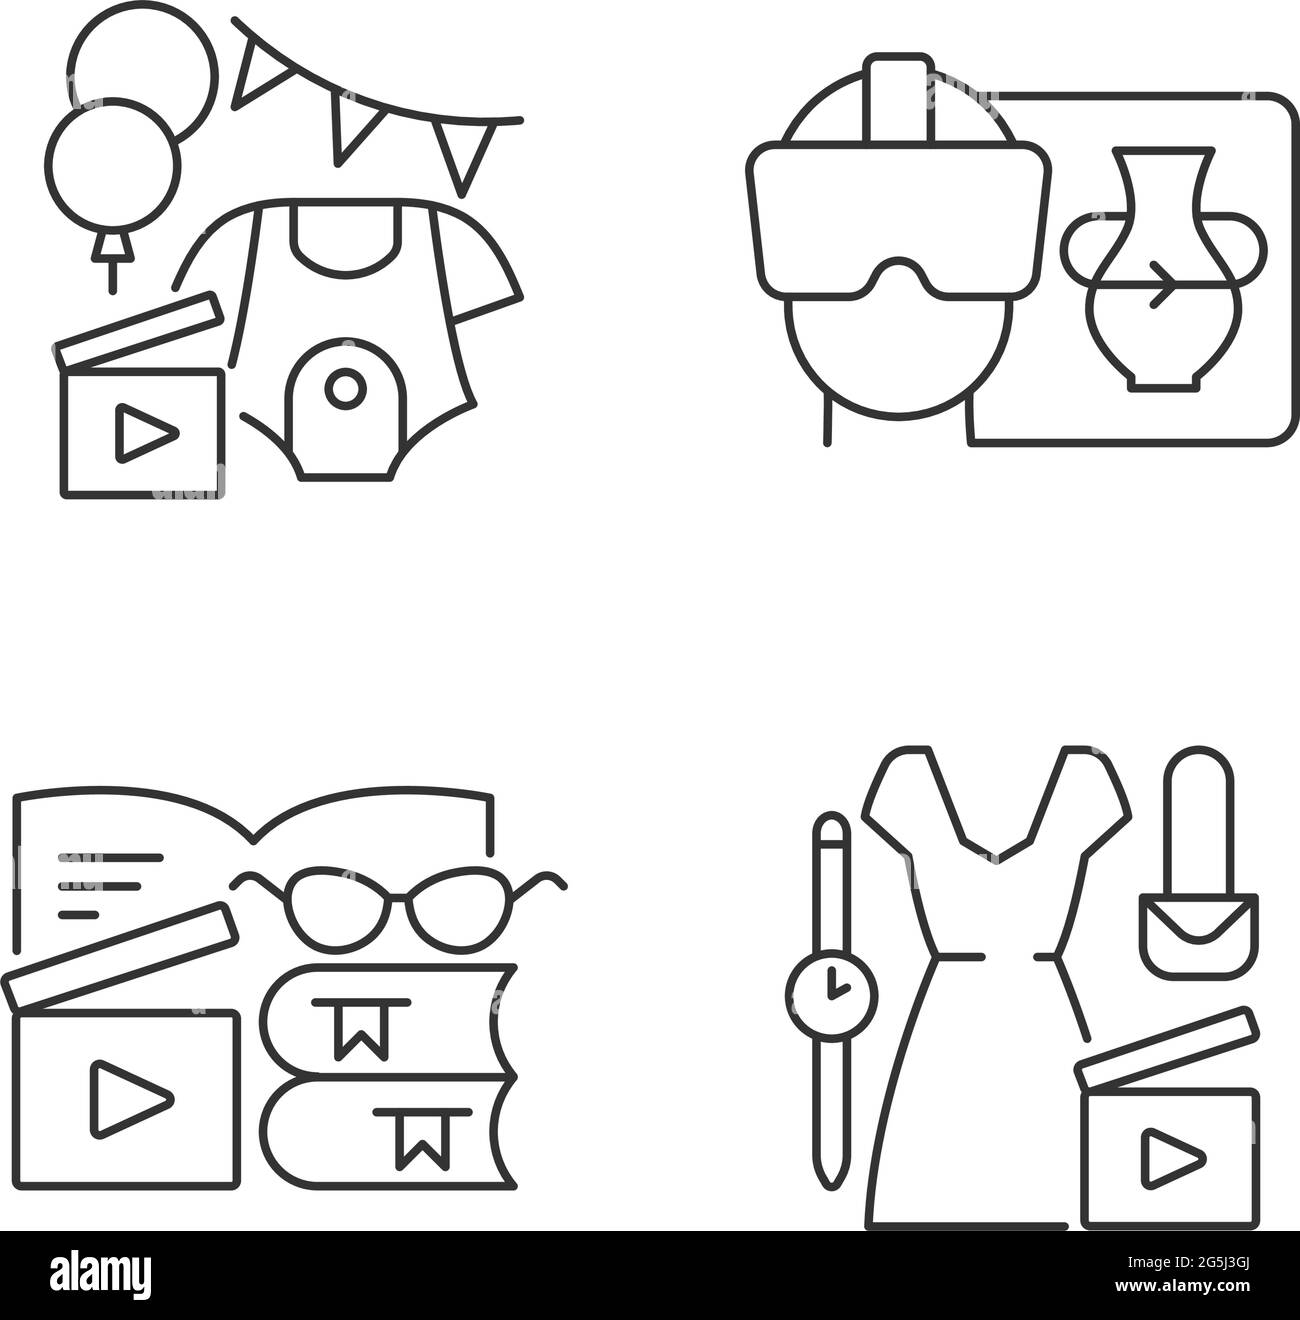 Types of video linear icons set Stock Vector